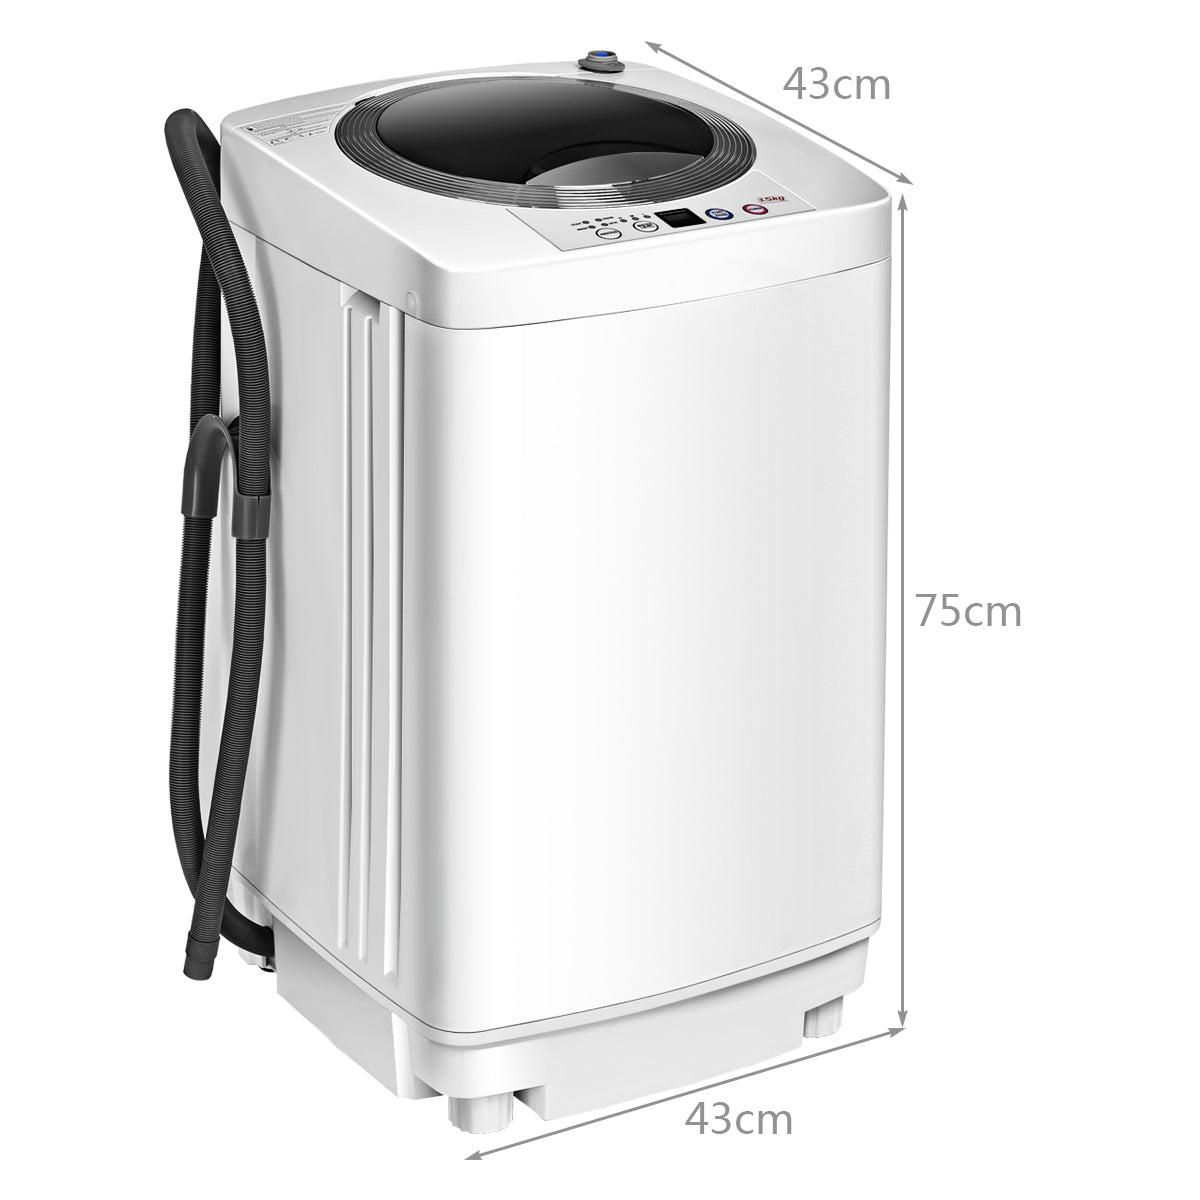 Portable 8 lbs Load Capacity Compact Full-Automatic Laundry